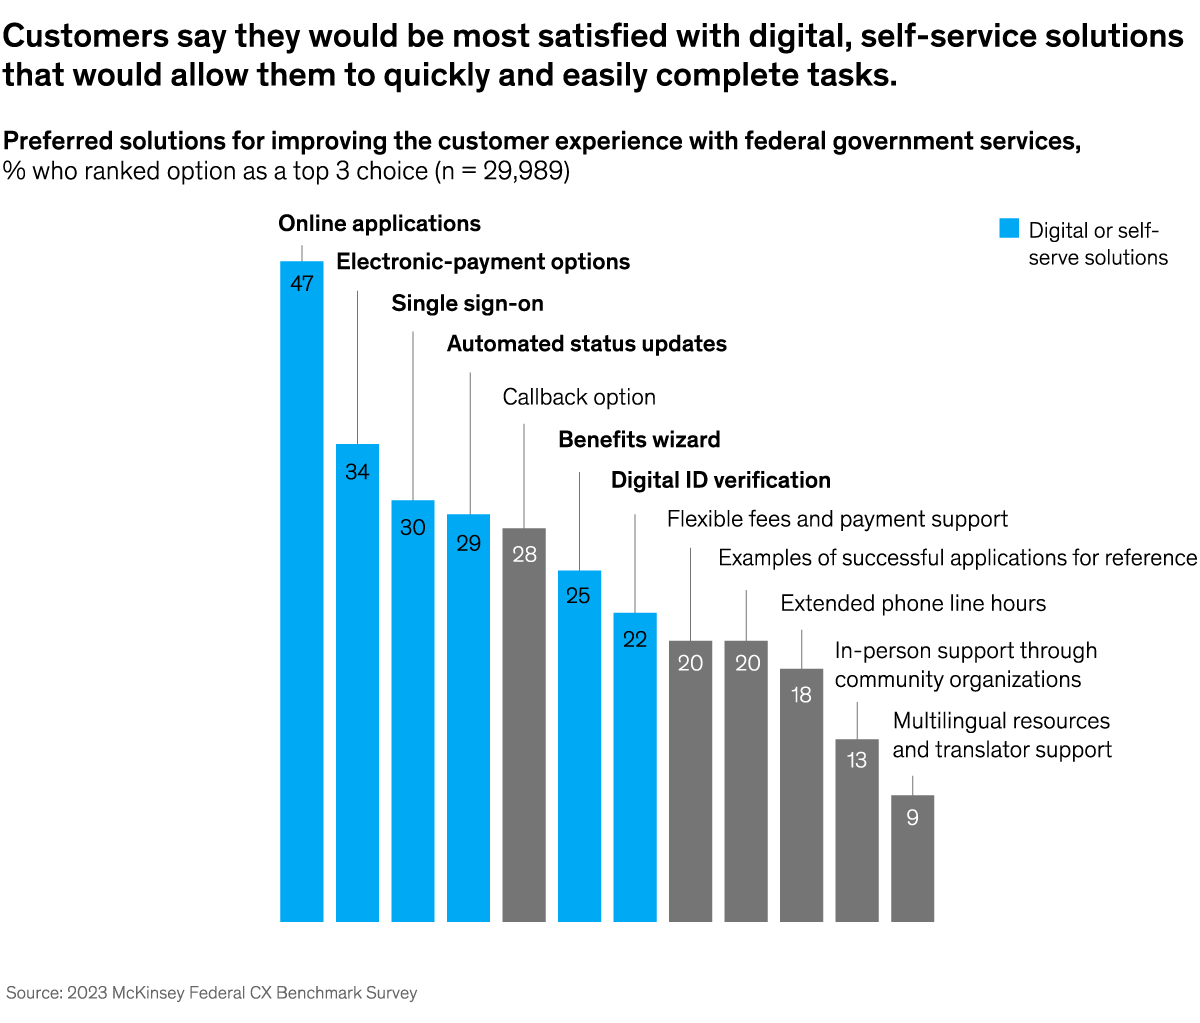 A chart titled “Customers say they would be most satisfied with digital, self-service solutions that would allow them to quickly and easily complete tasks.” Click to open the full article on McKinsey.com.